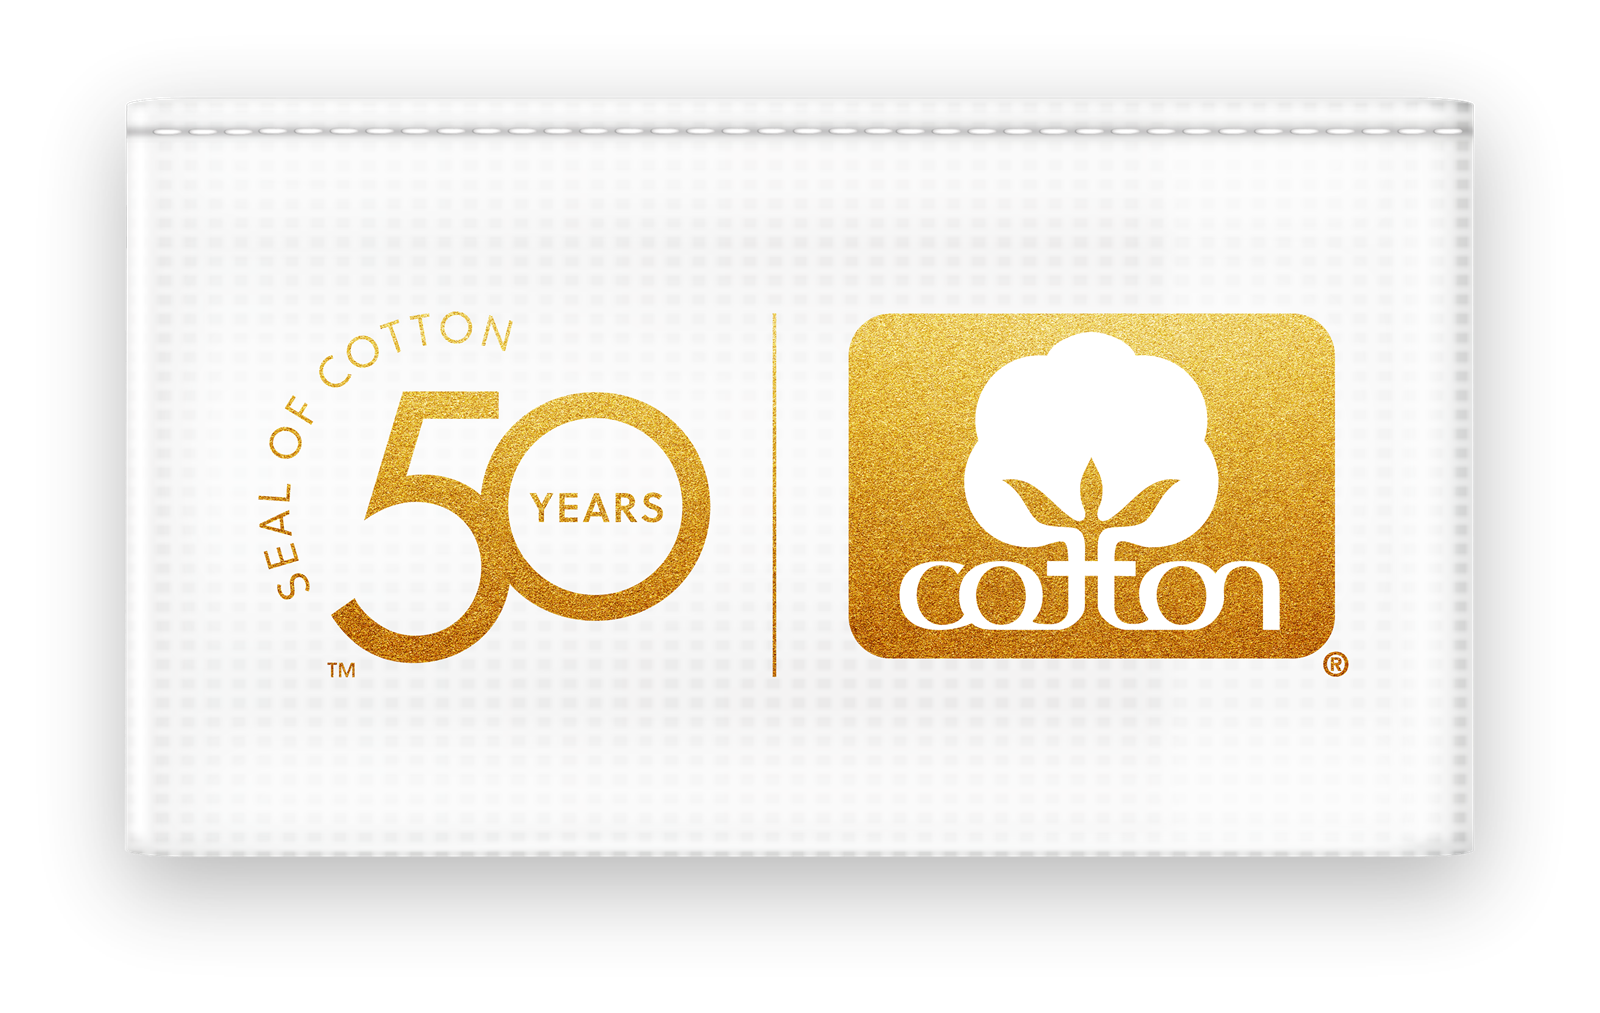 Seal of Cotton 50th Anniversary Logo Horizontal - Promoting a Commodity into a Brand Relevant Across Eras